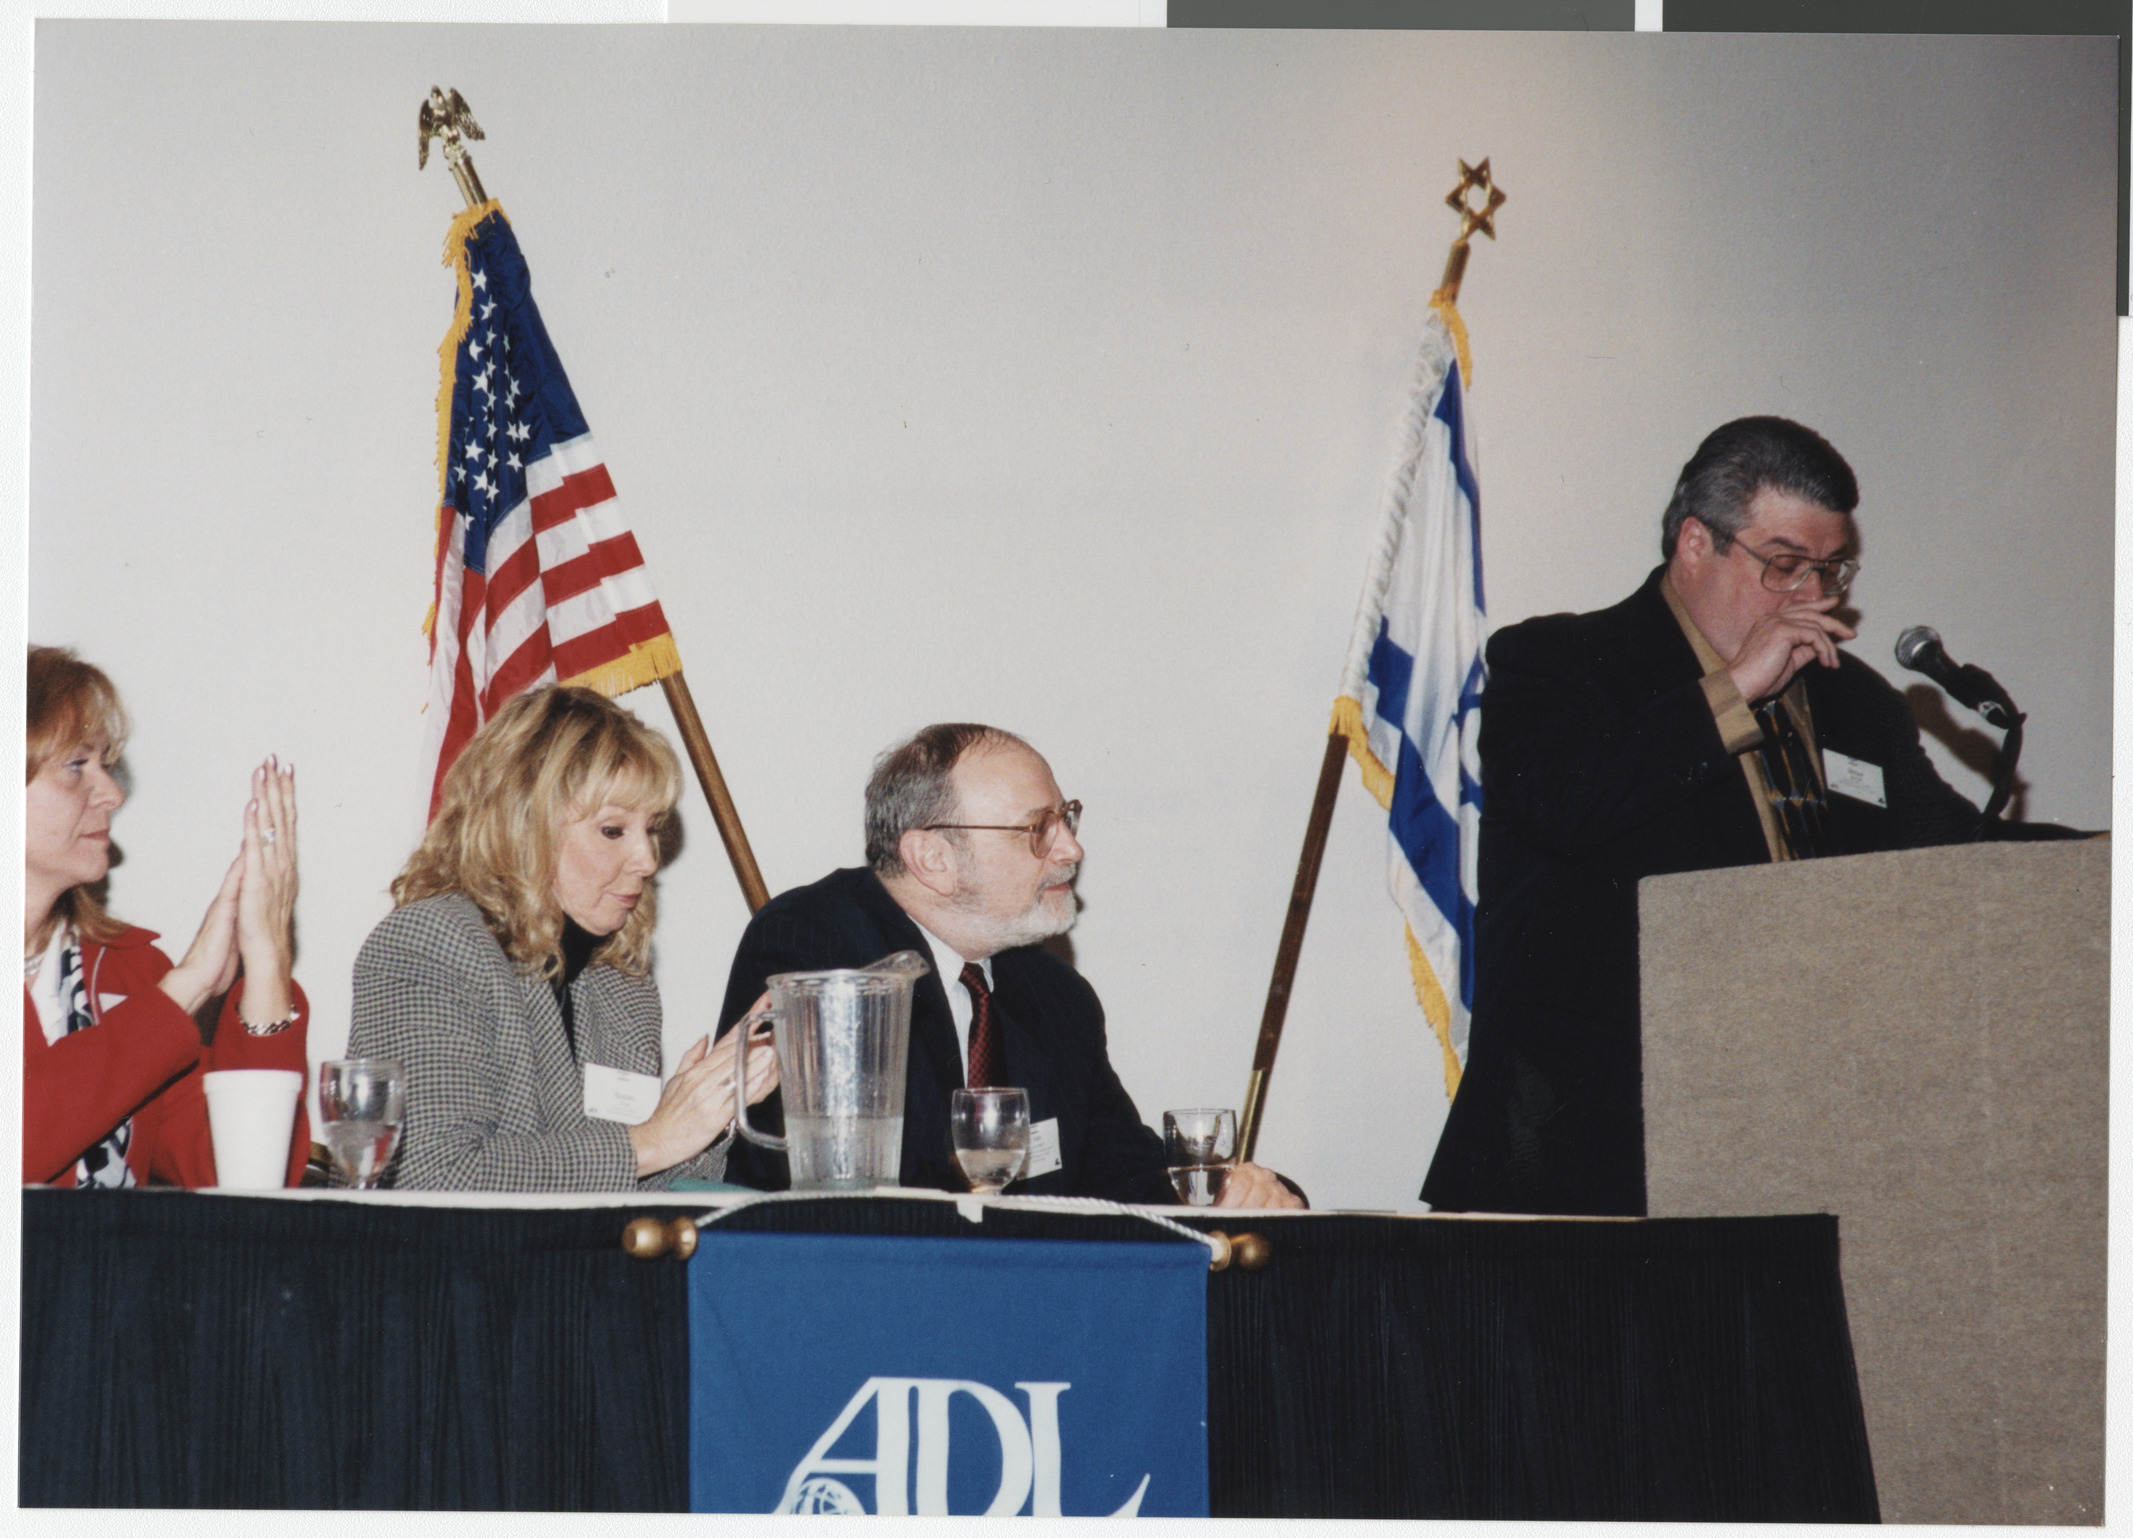 Photographs of an Anti-Defamation League meeting, undated